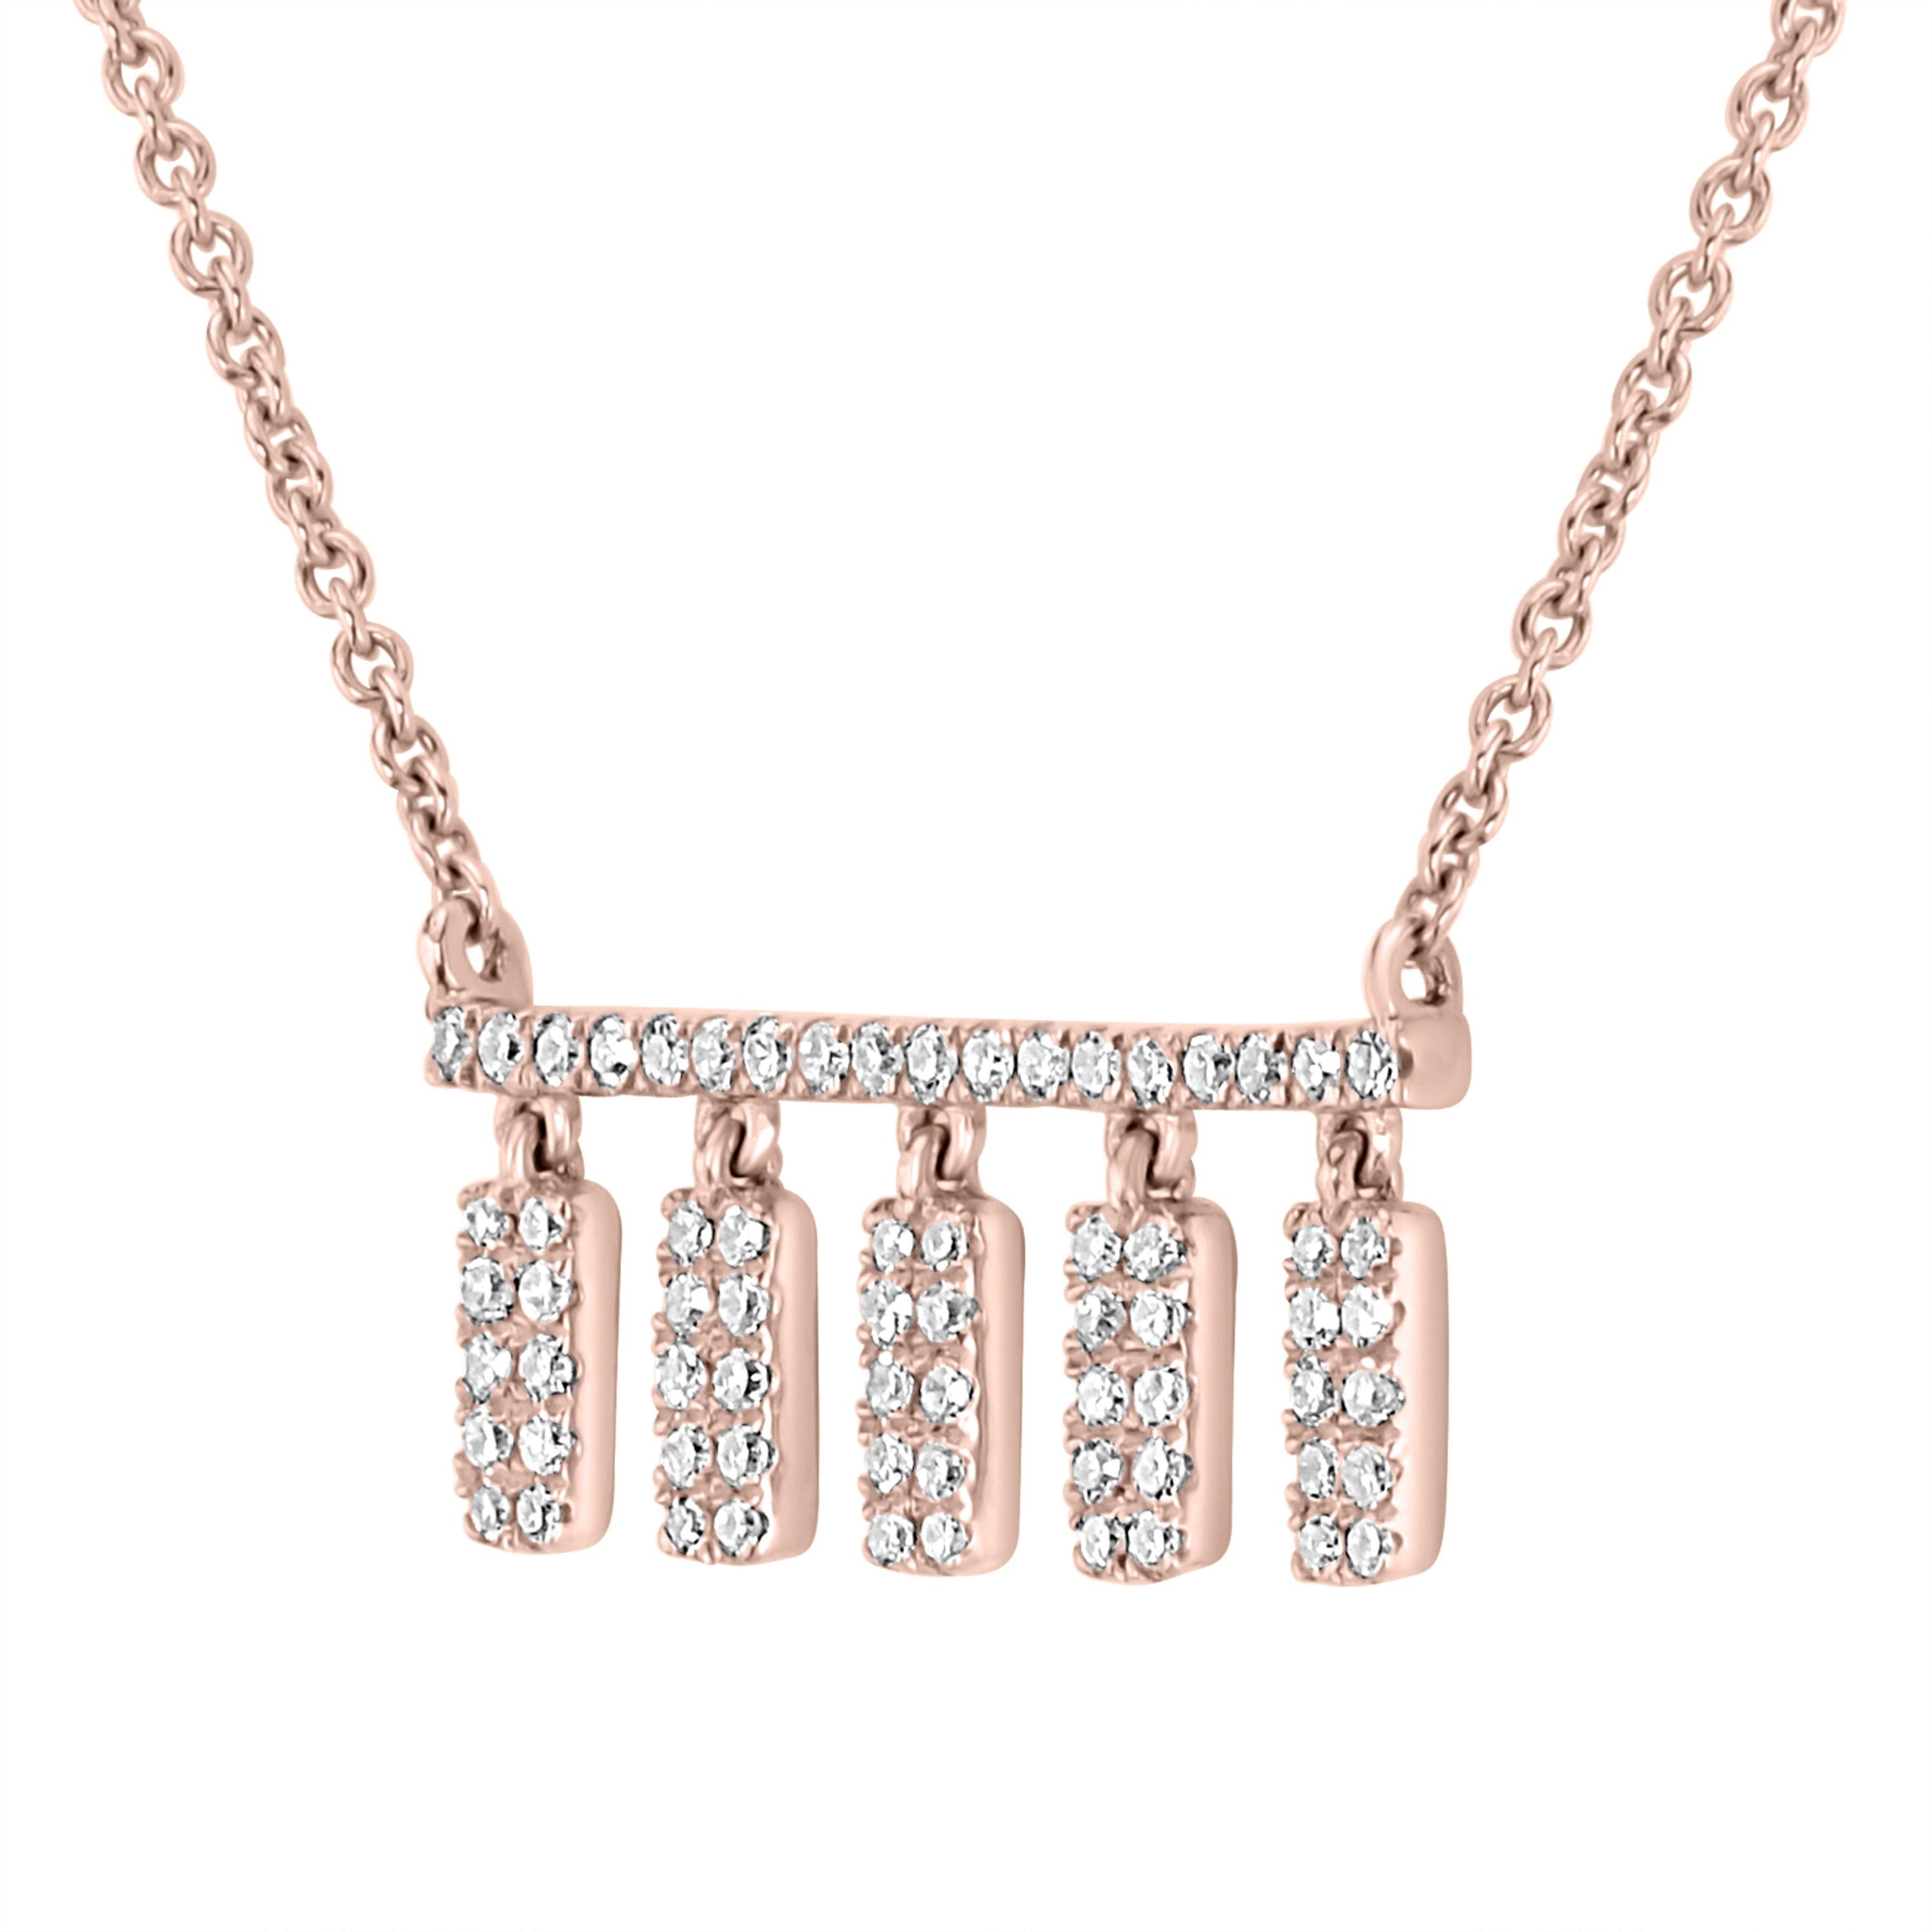 Get a classic look with this Luxle pendant necklace featured with rectangular bars embellished with glittering pave round cut diamonds cascading from a delicate cable chain of 14K rose gold.

Please follow the Luxury Jewels storefront to view the